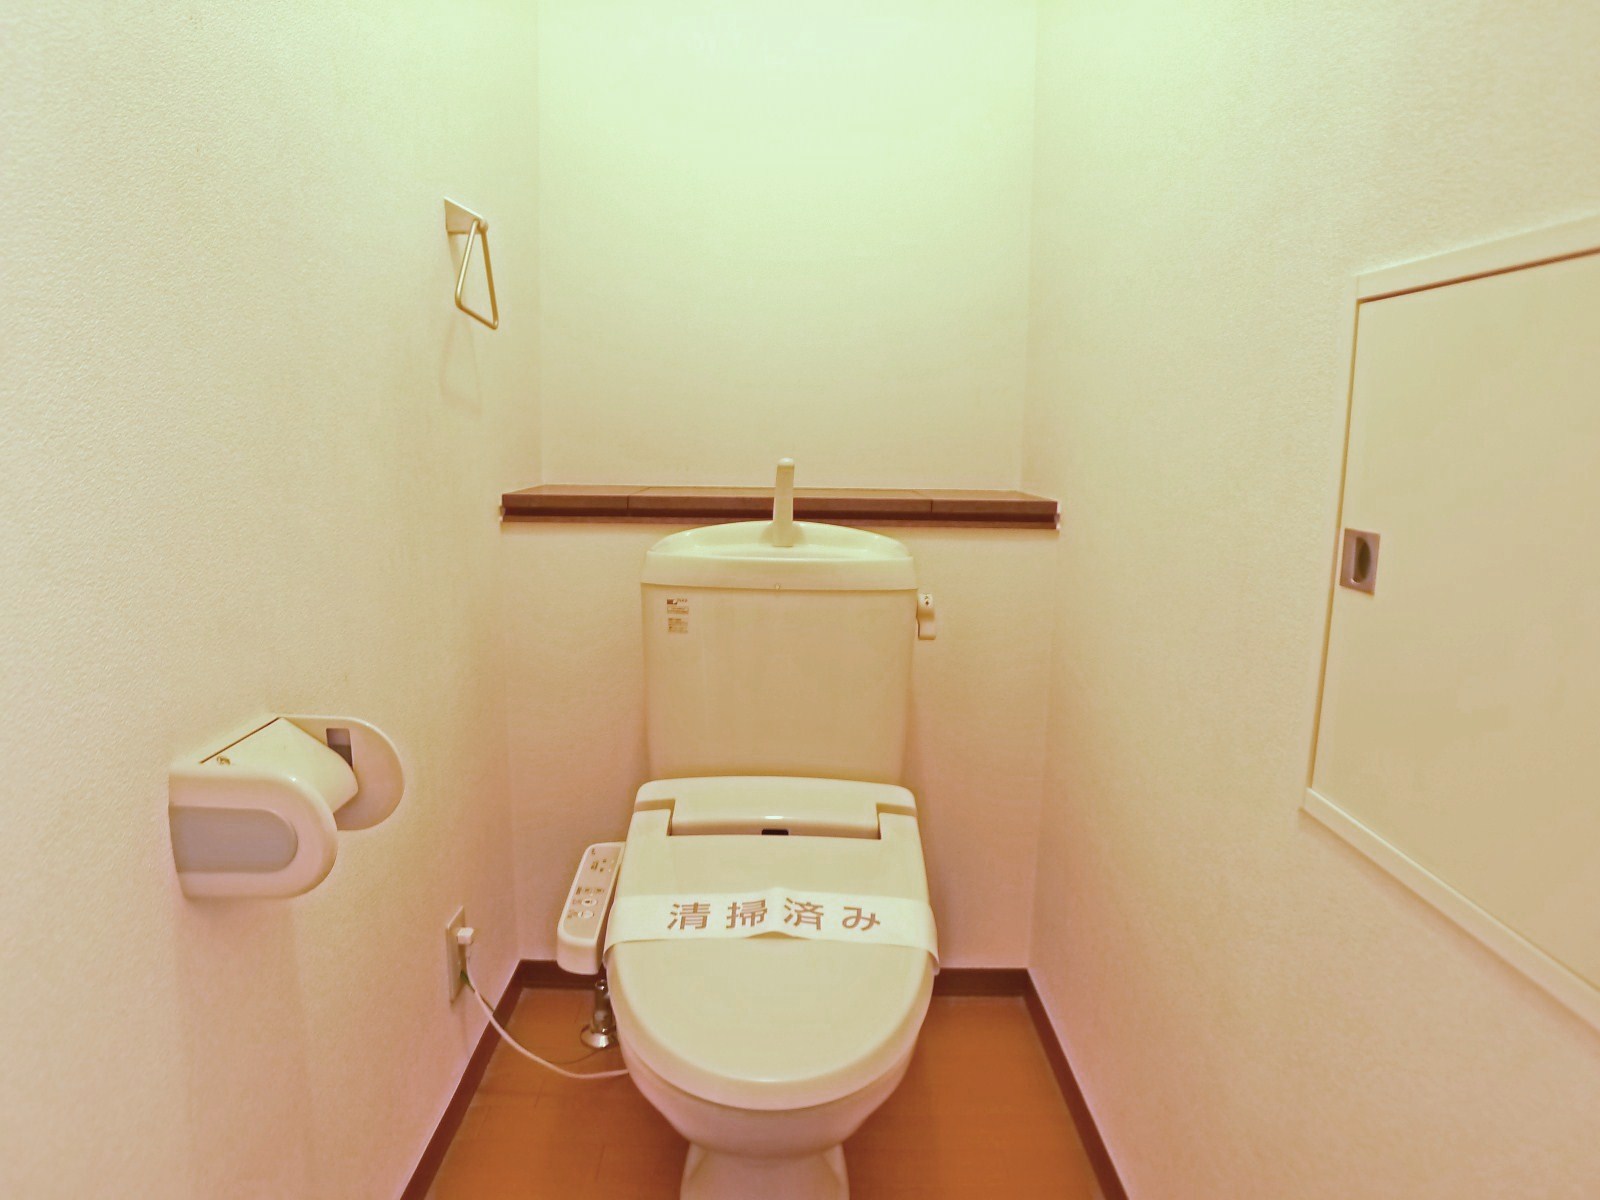 Toilet. It is your toilet with storage